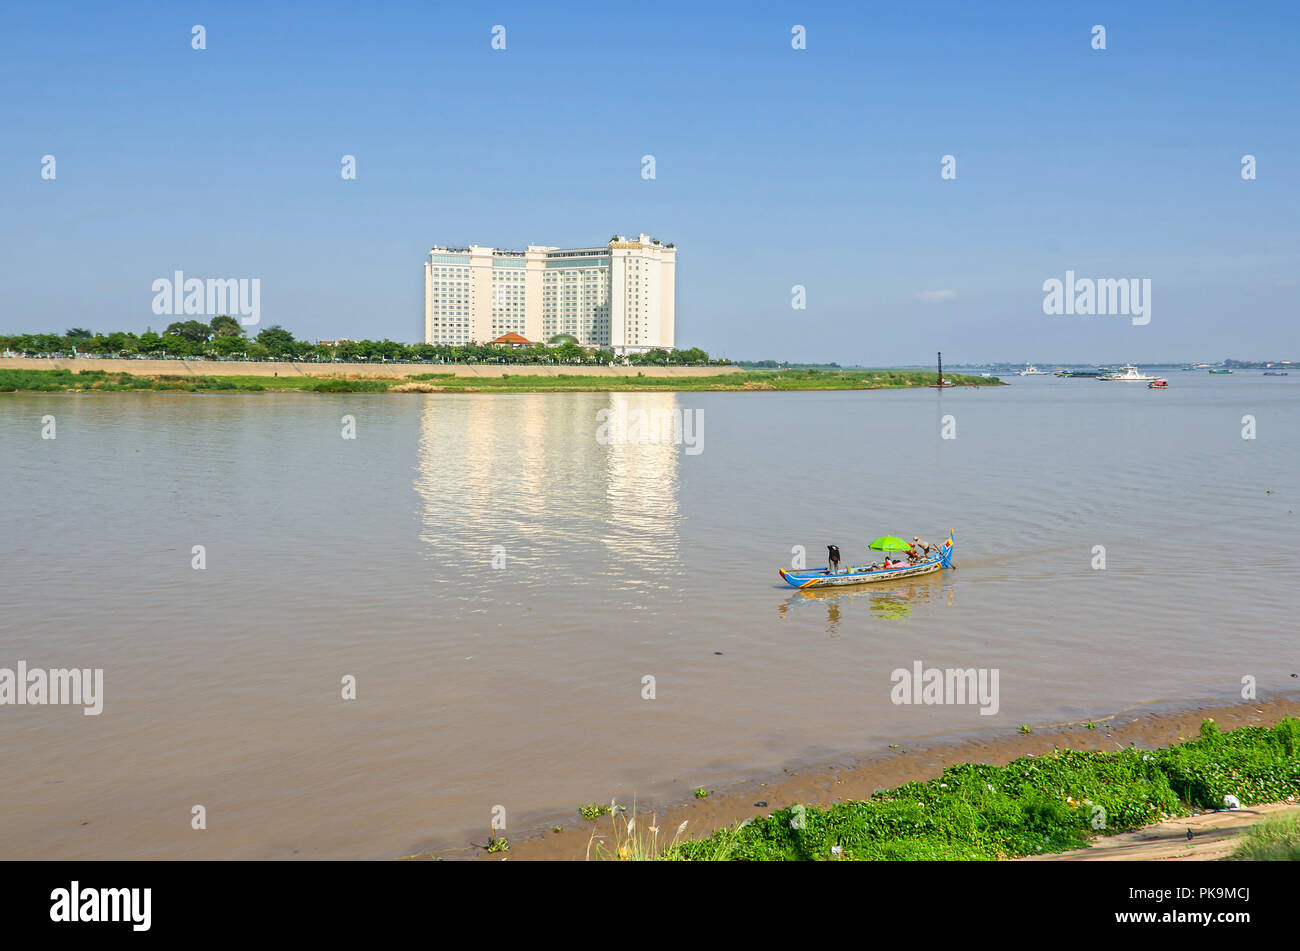 Phnom Penh, Cambodia - April 9, 2018: View from the Preah Sisowath Quay and from the Riverside Park over the navigable Tonle Sap River Stock Photo